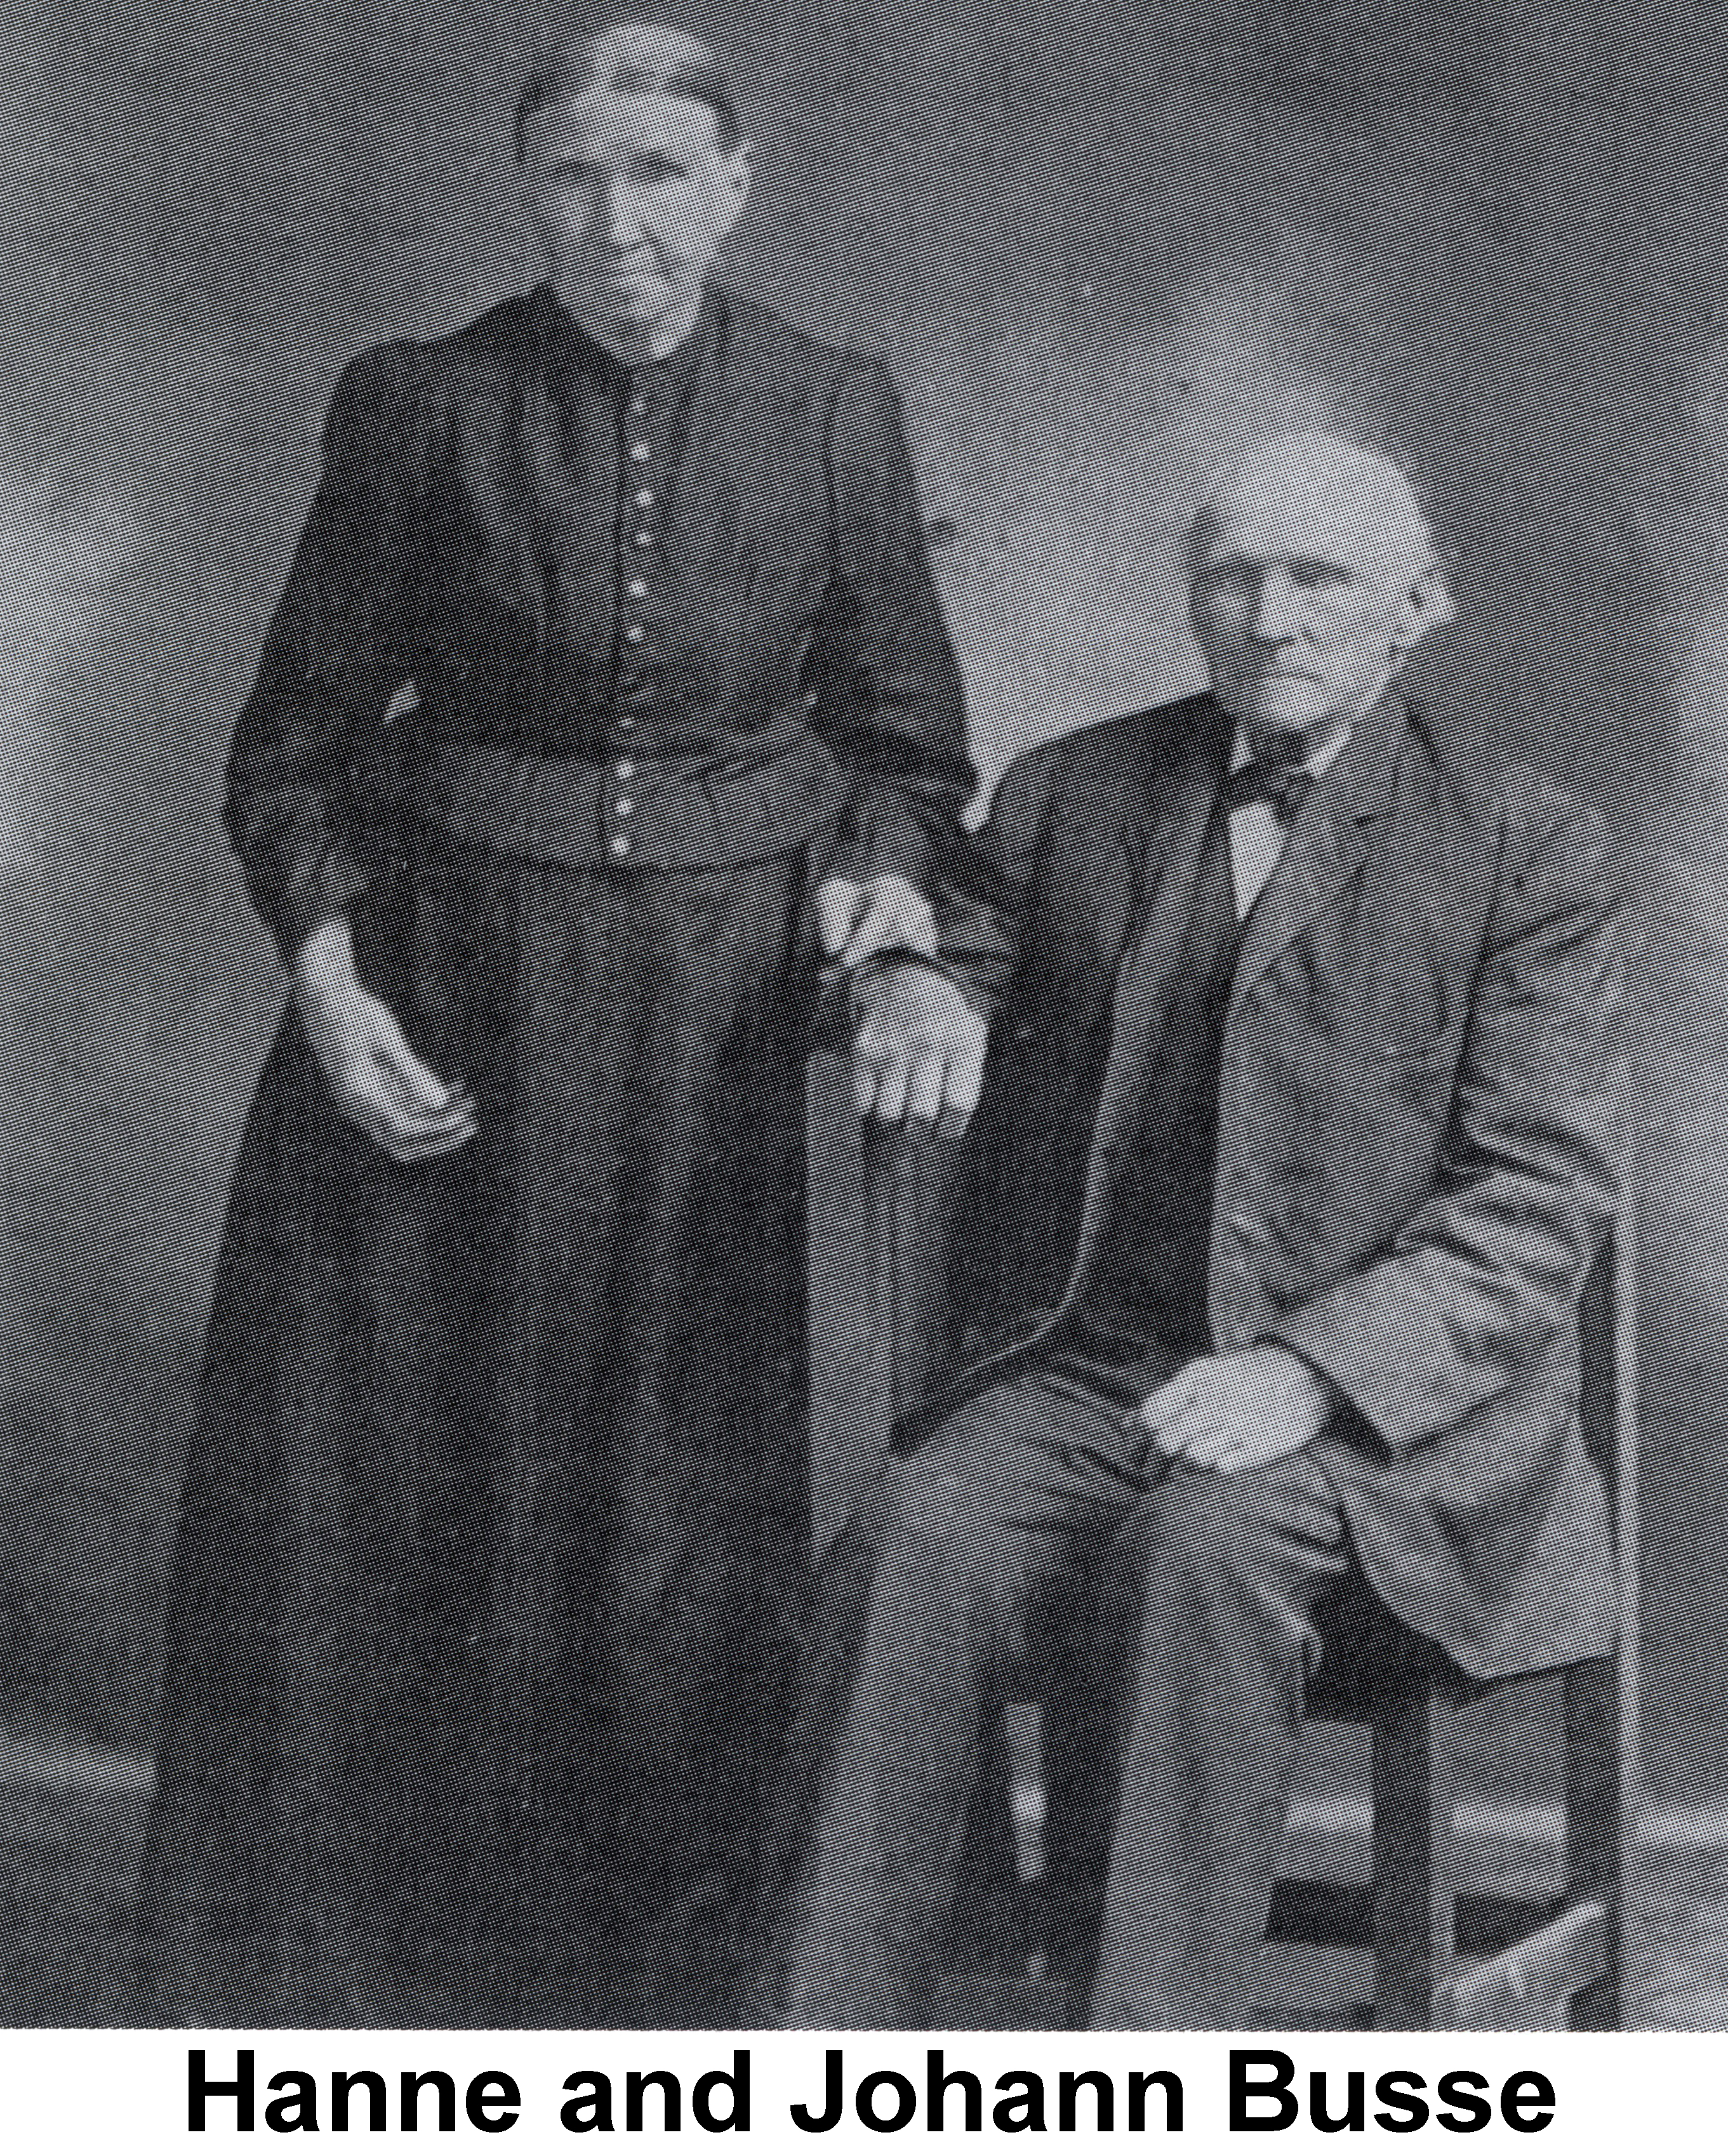 Hanne and Johann Busse, founders of the Busse family in Cook County, Illinois